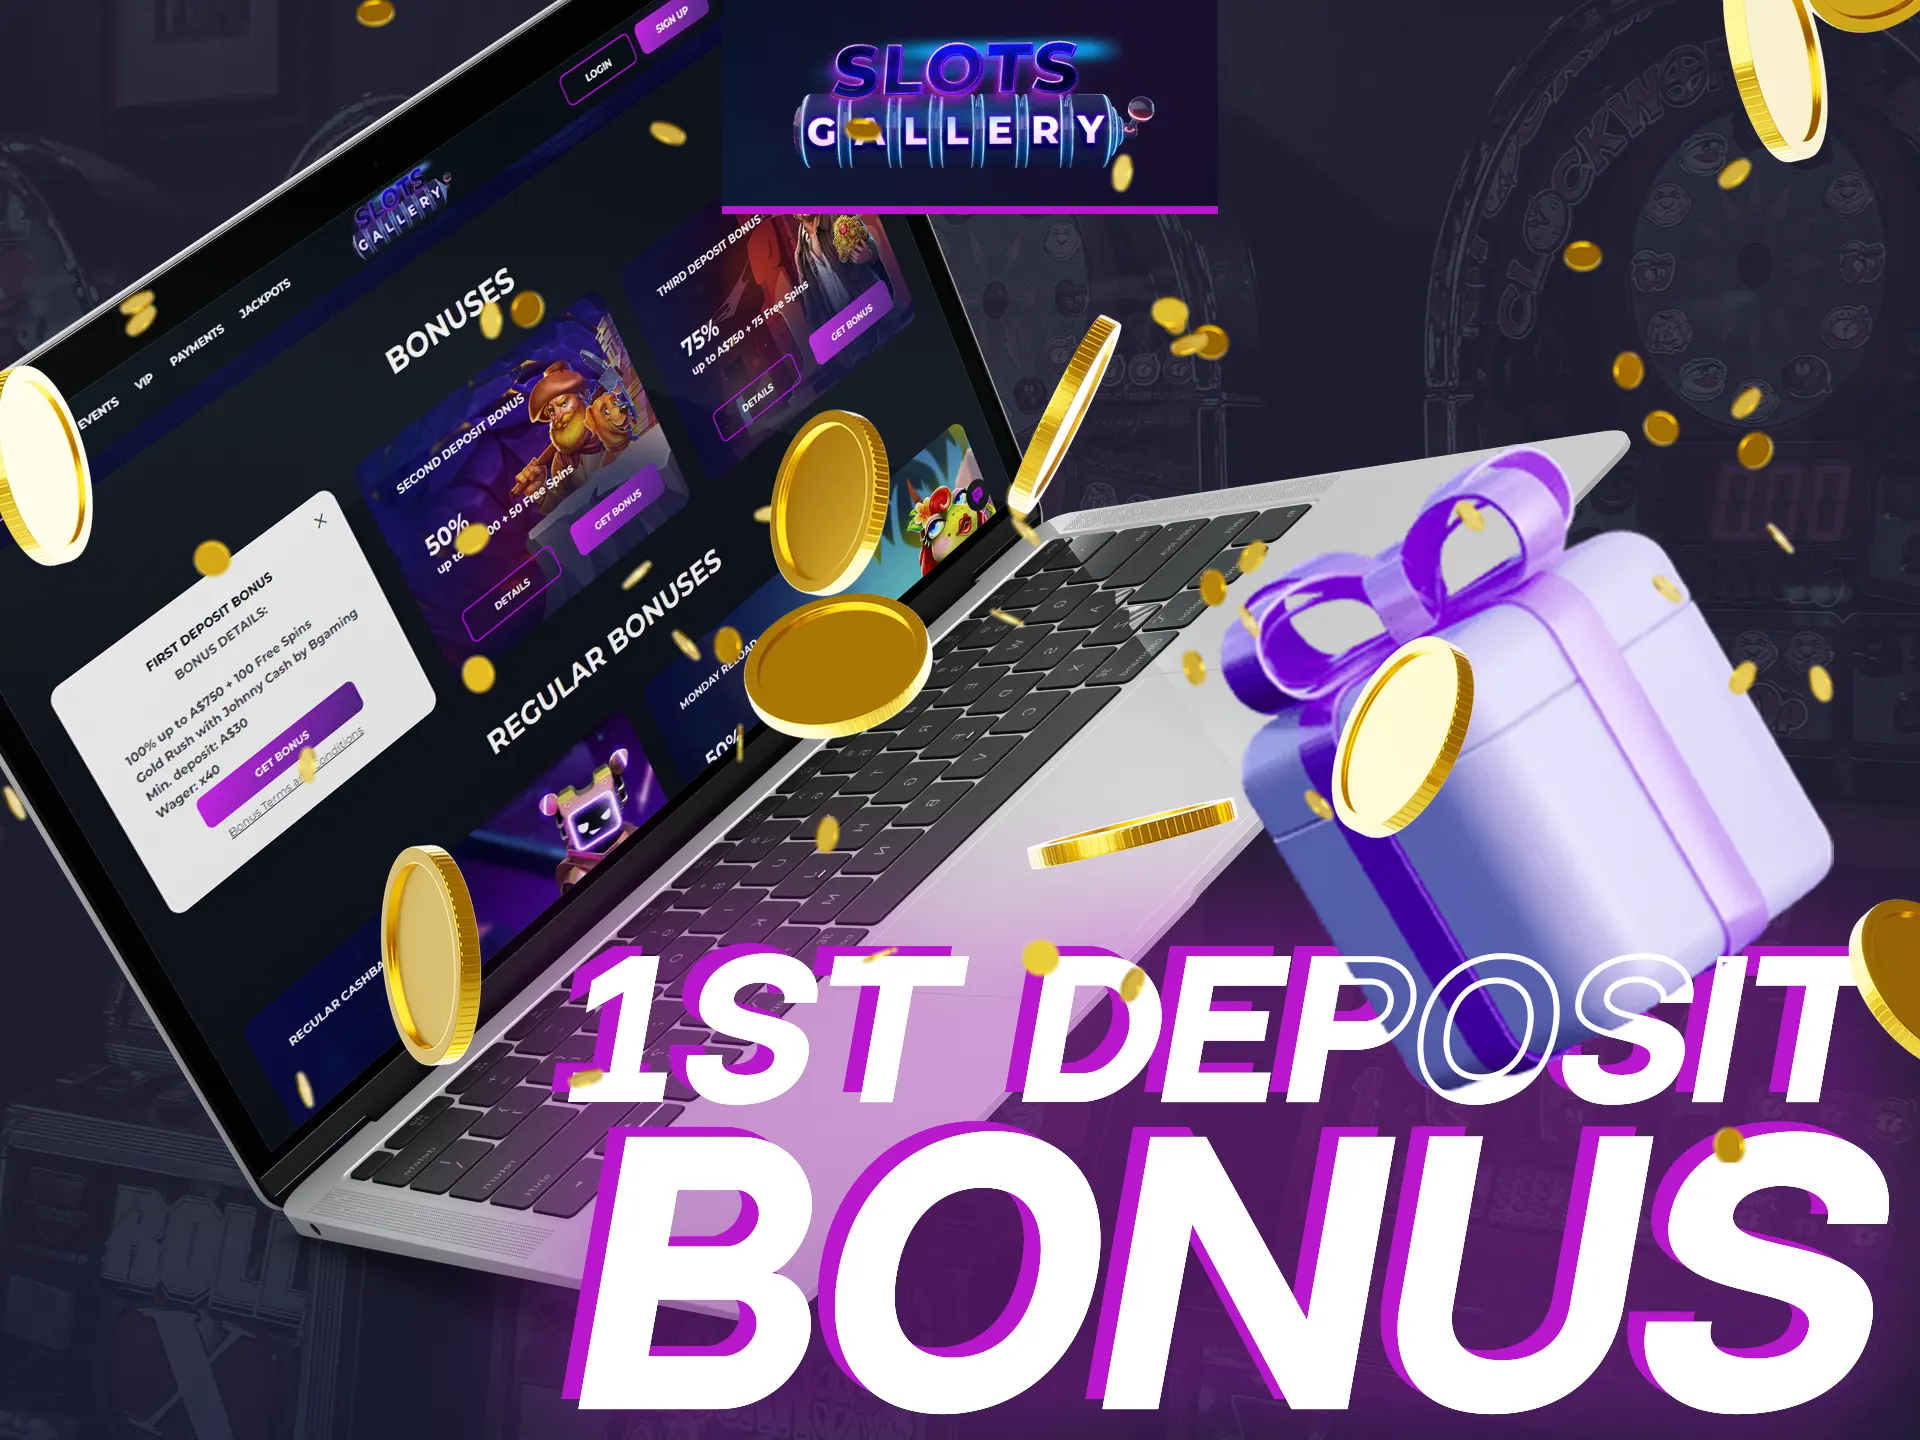 Get an chance to get incredible multiplication of your deposit with 1st deposit bonus.